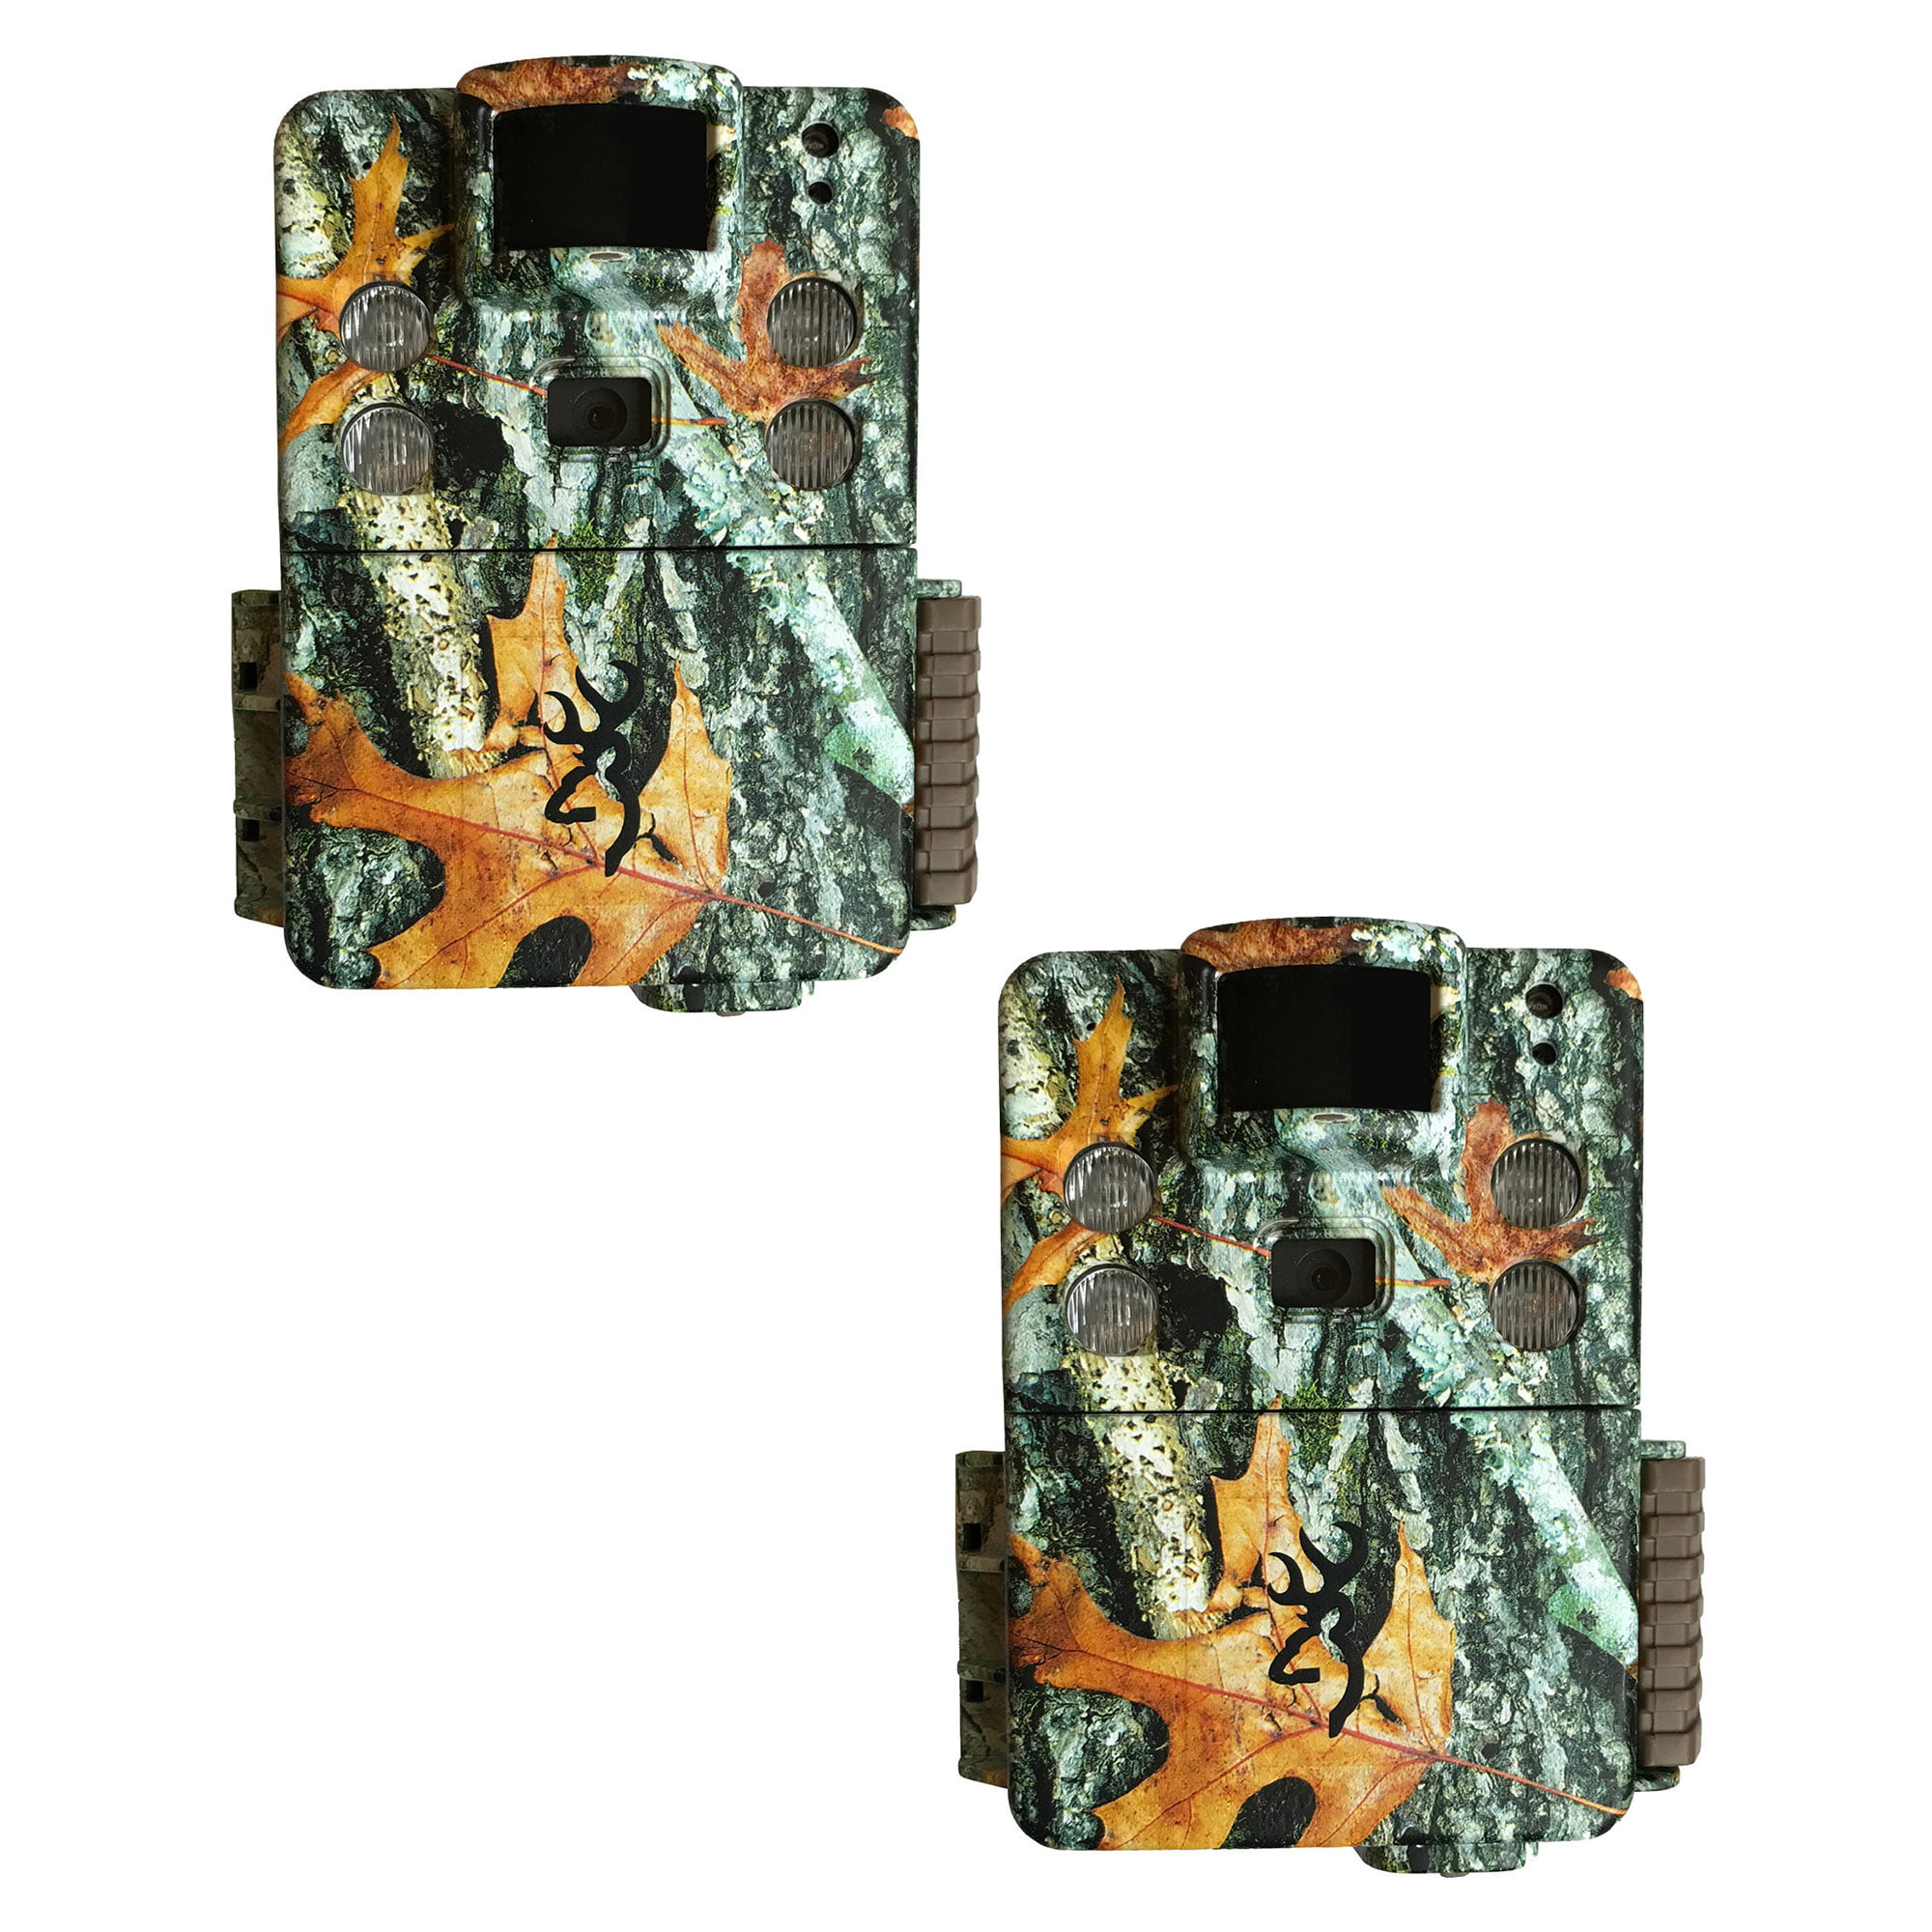 Browning BTC-5HDPX Game Trail Cameras Strike Force Pro X 20 MP Game Cam Camo